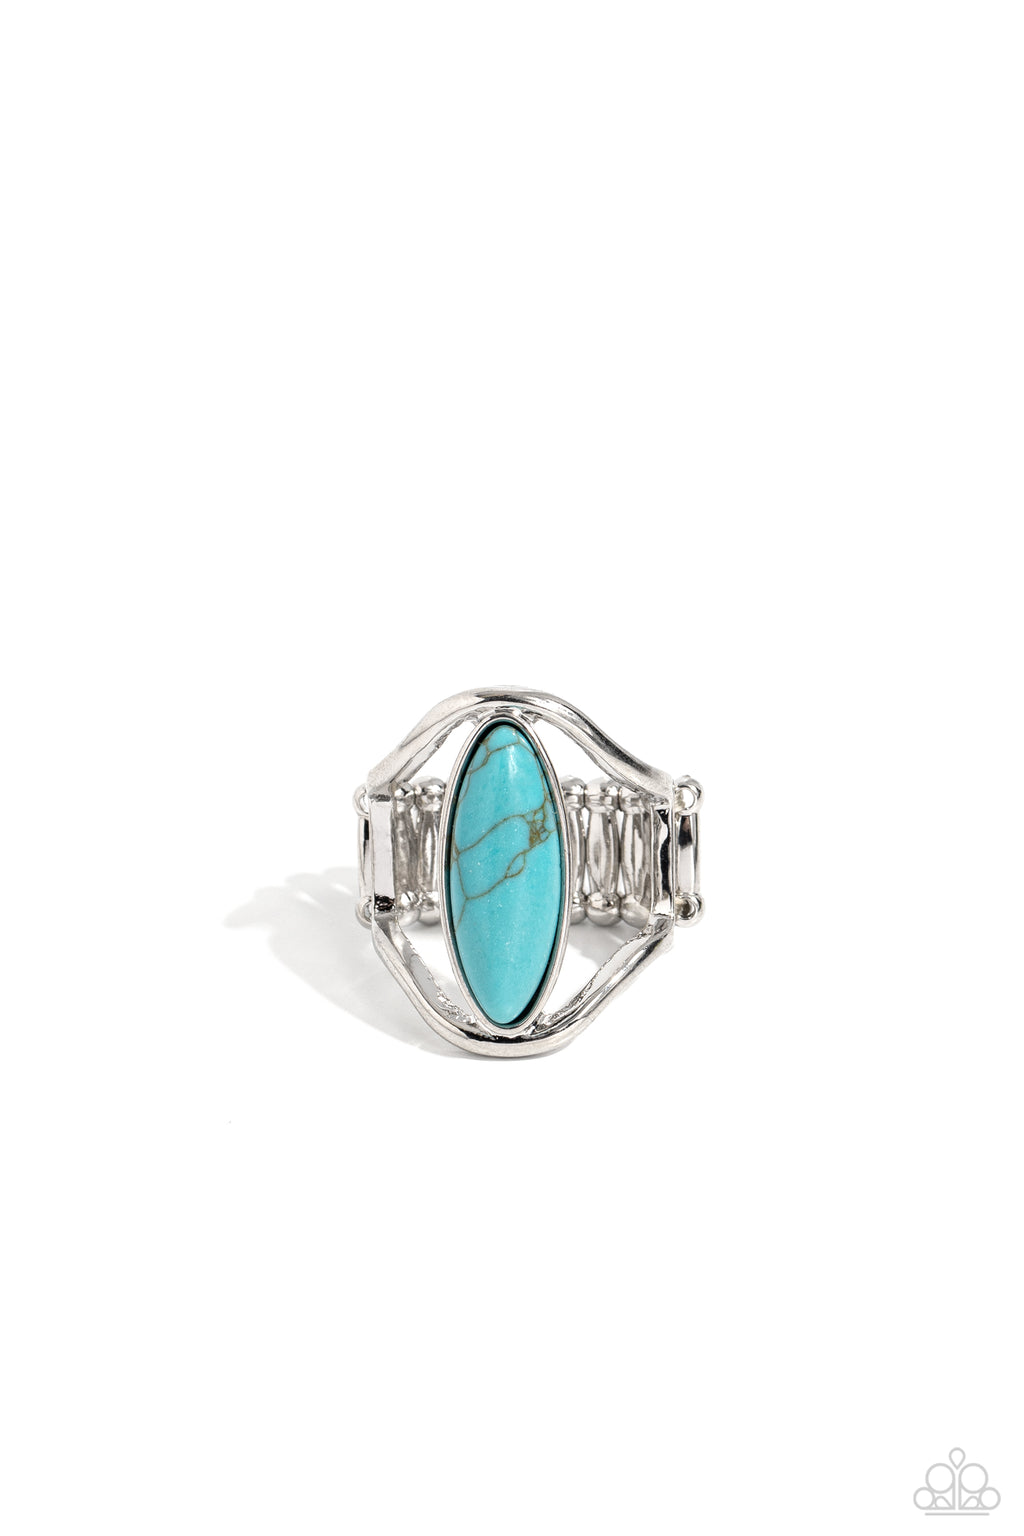 five-dollar-jewelry-spartan-stone-blue-ring-paparazzi-accessories